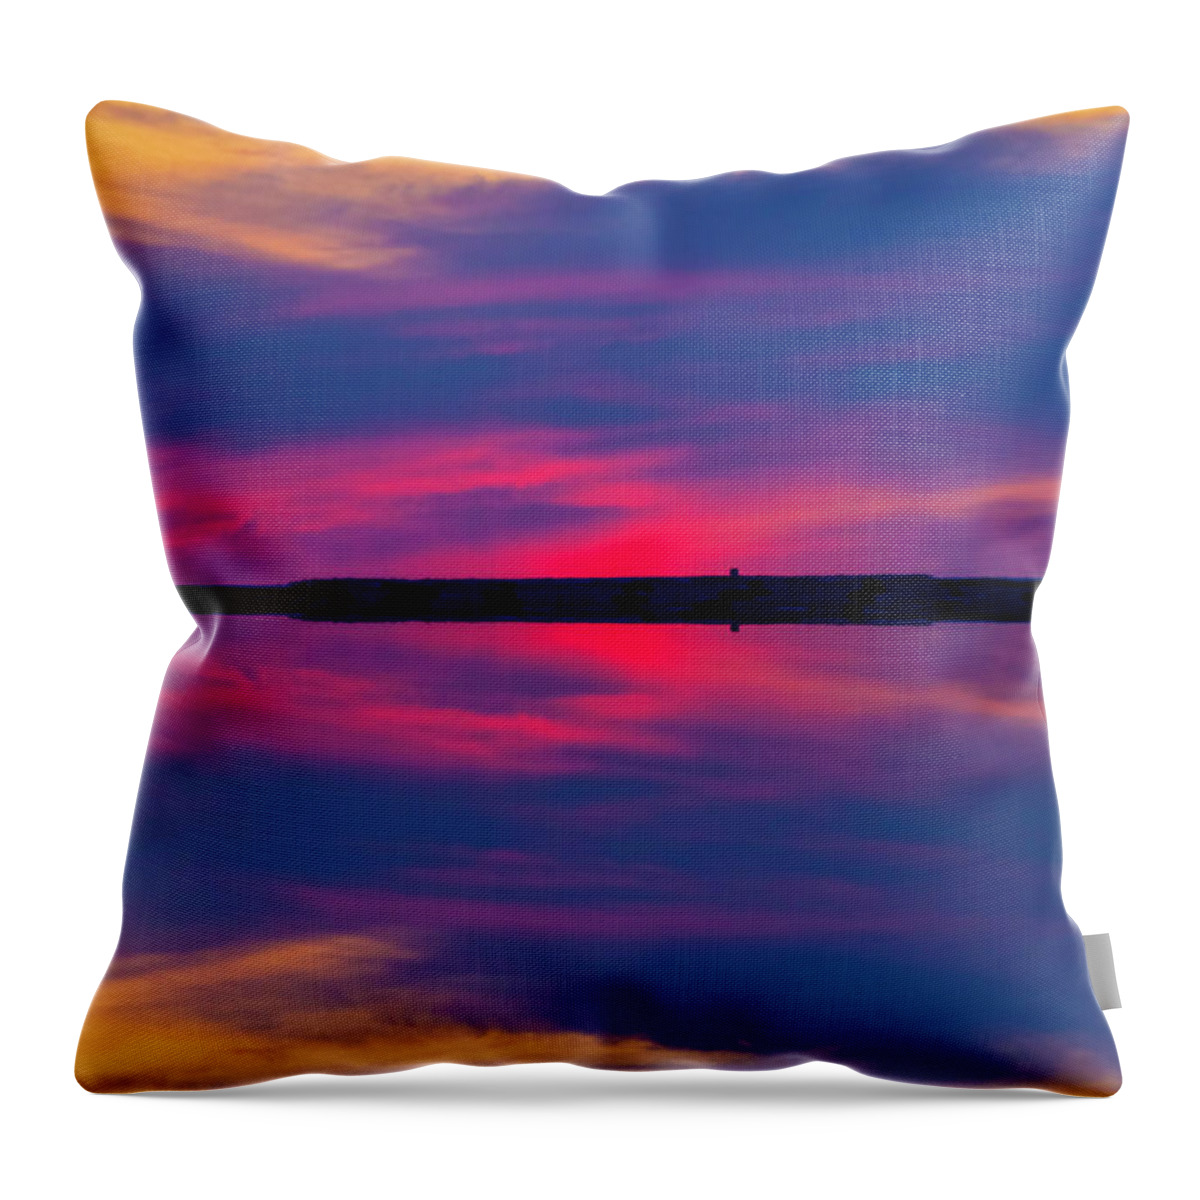 Pamlico Sound Throw Pillow featuring the photograph Pamlico Sound Sunset 2011-10 01 by Jim Dollar